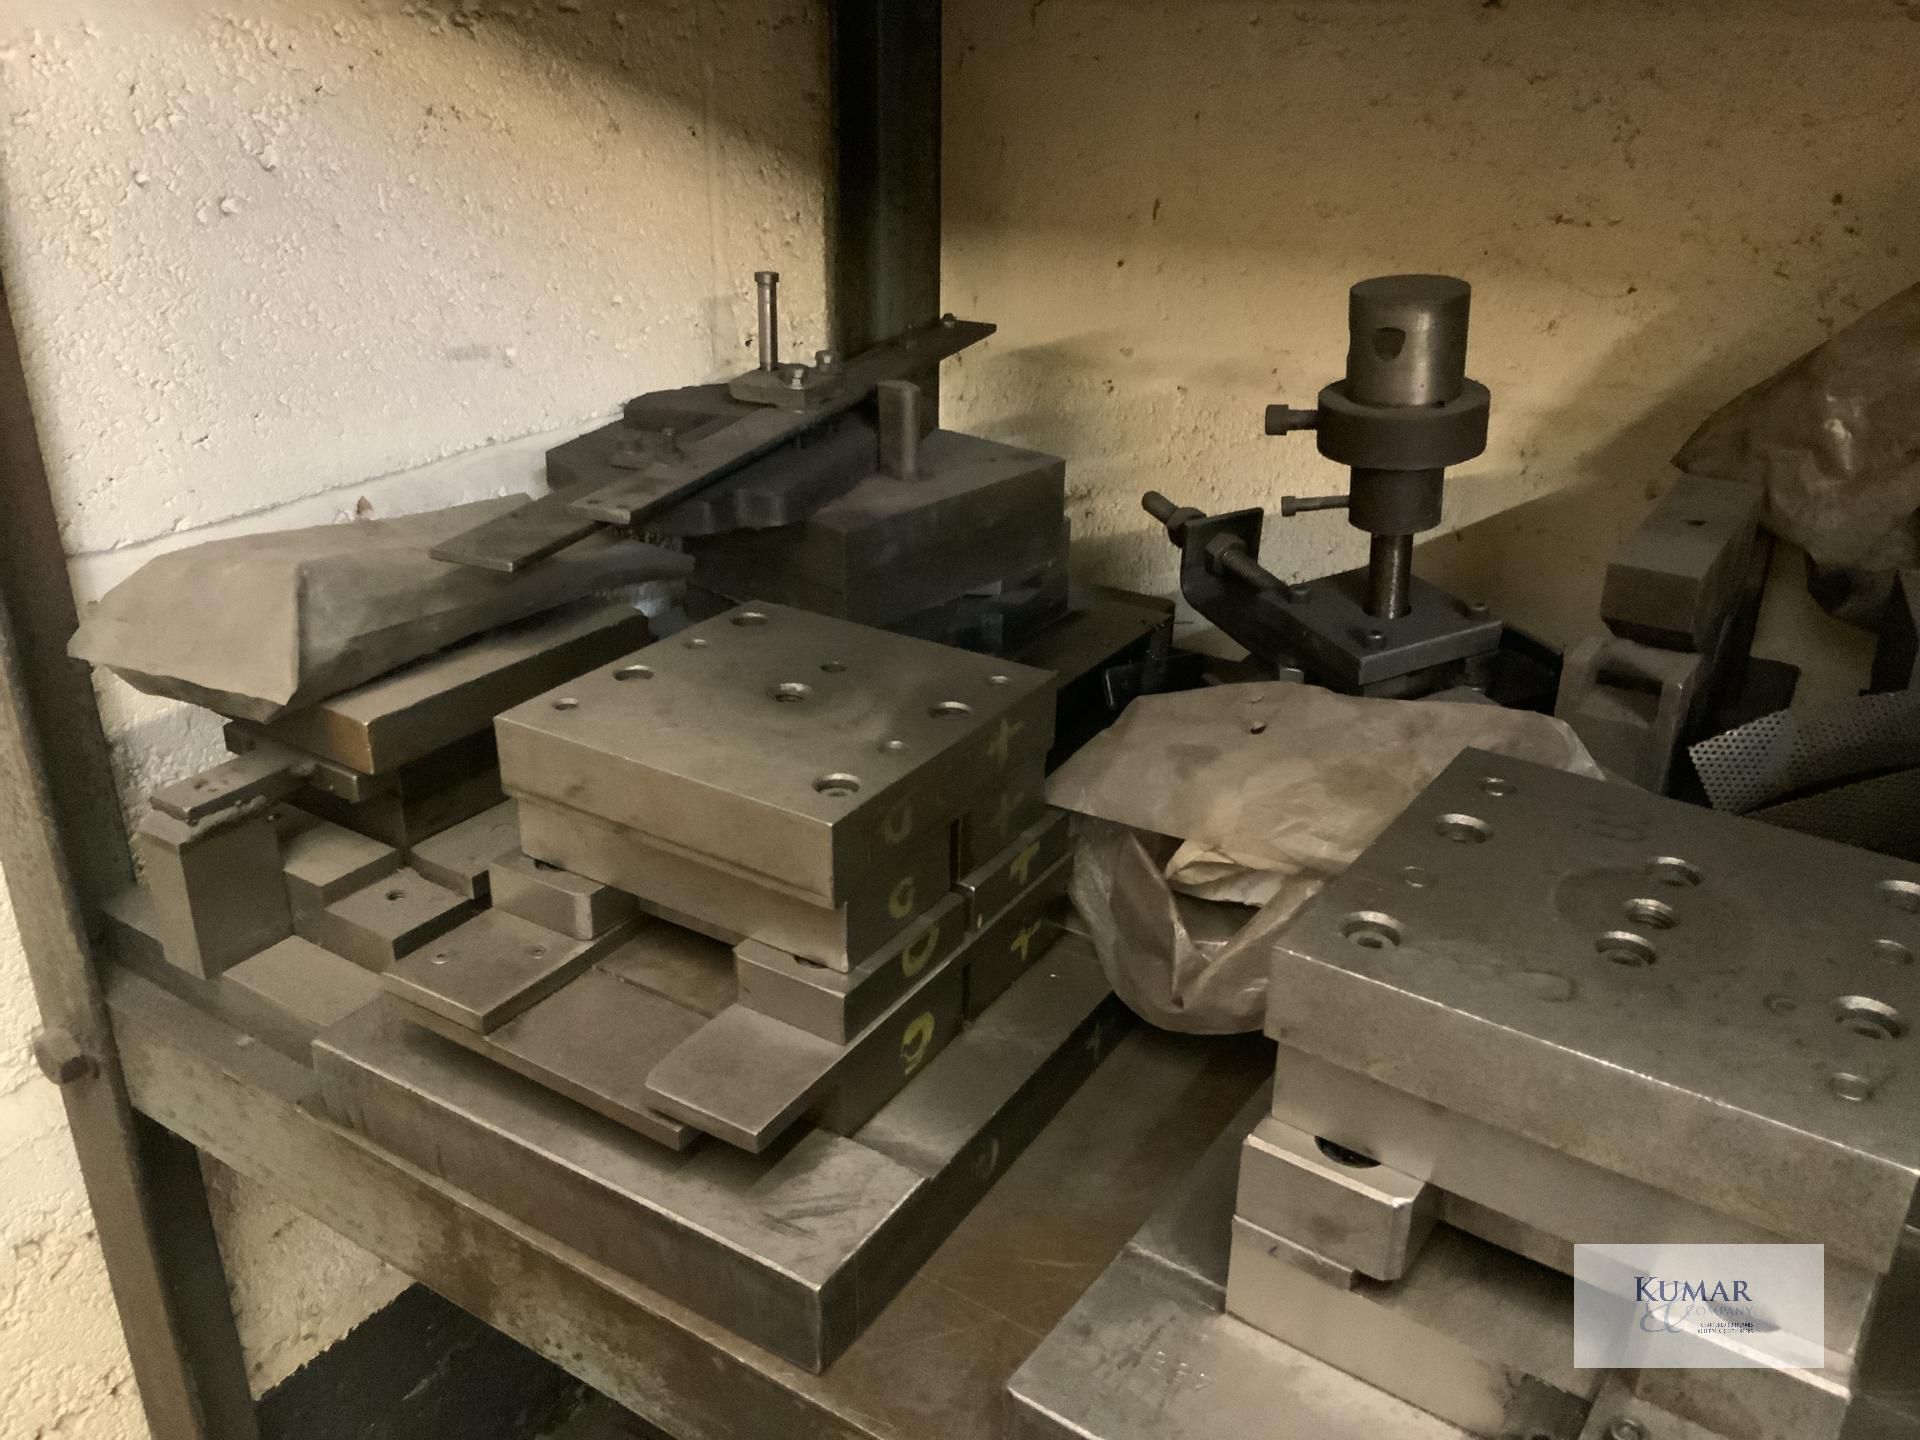 Machine tooling as imaged  Collection Day – Tuesday 27th February Unit 4 Goscote Industrial - Image 4 of 9